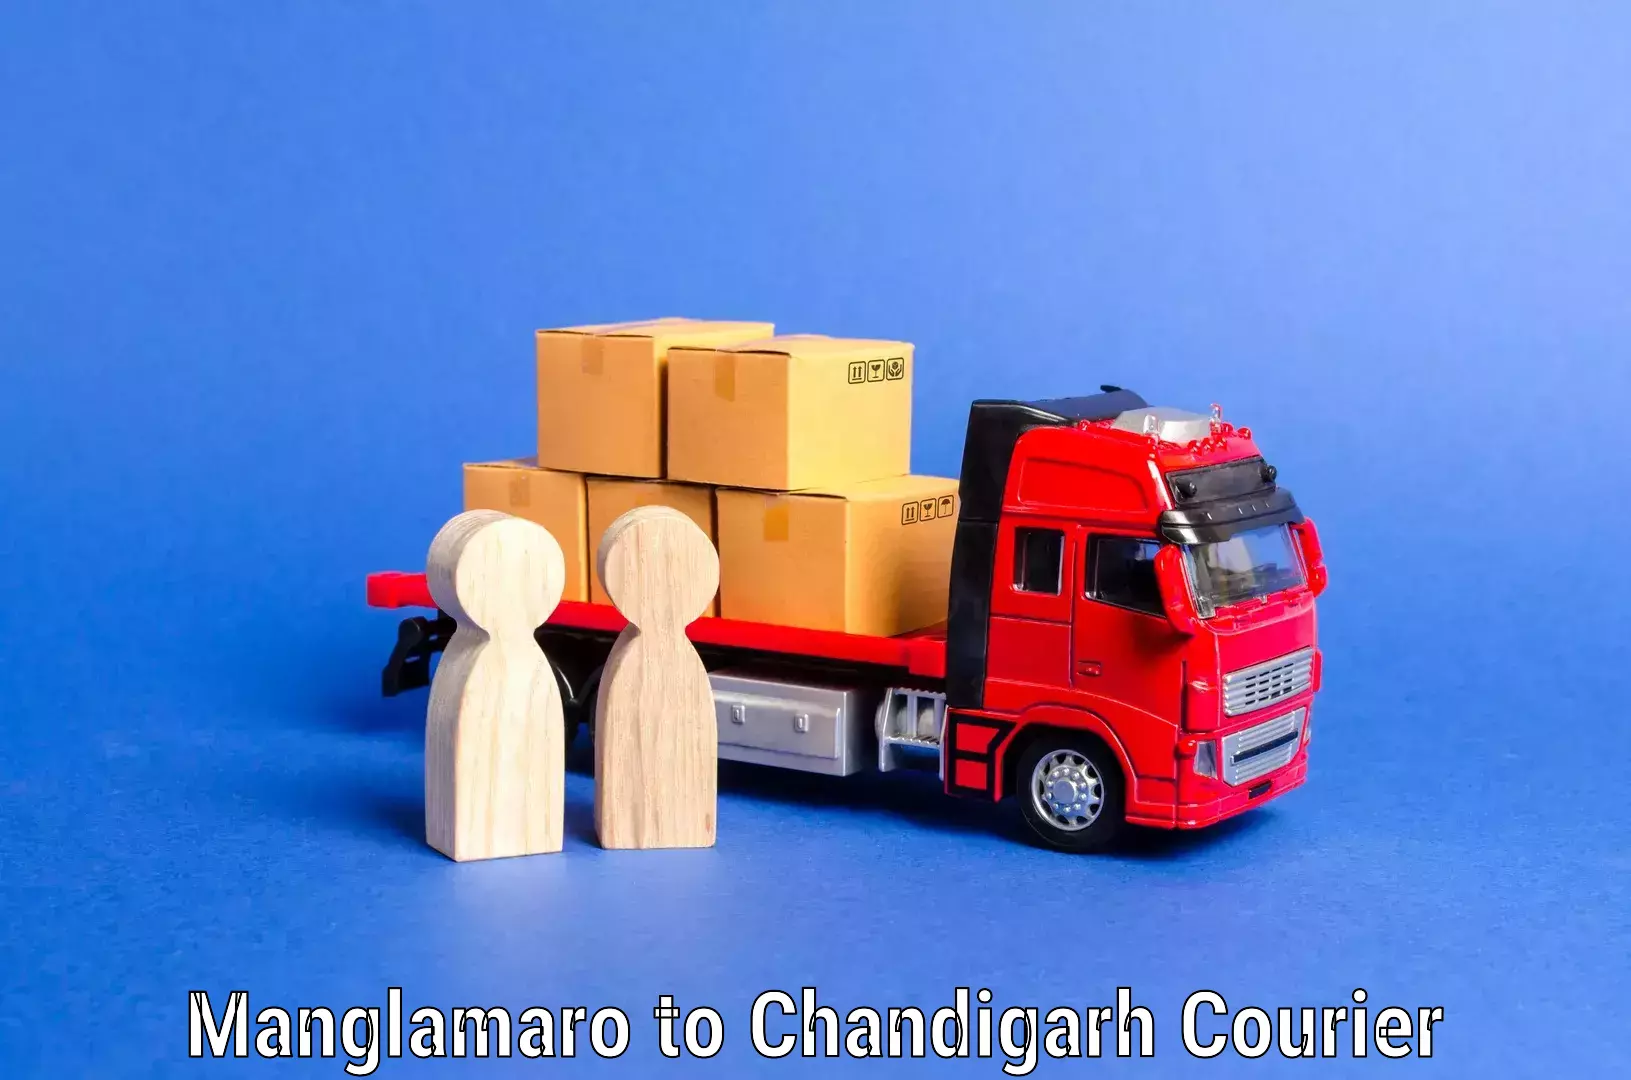 Professional relocation services Manglamaro to Chandigarh